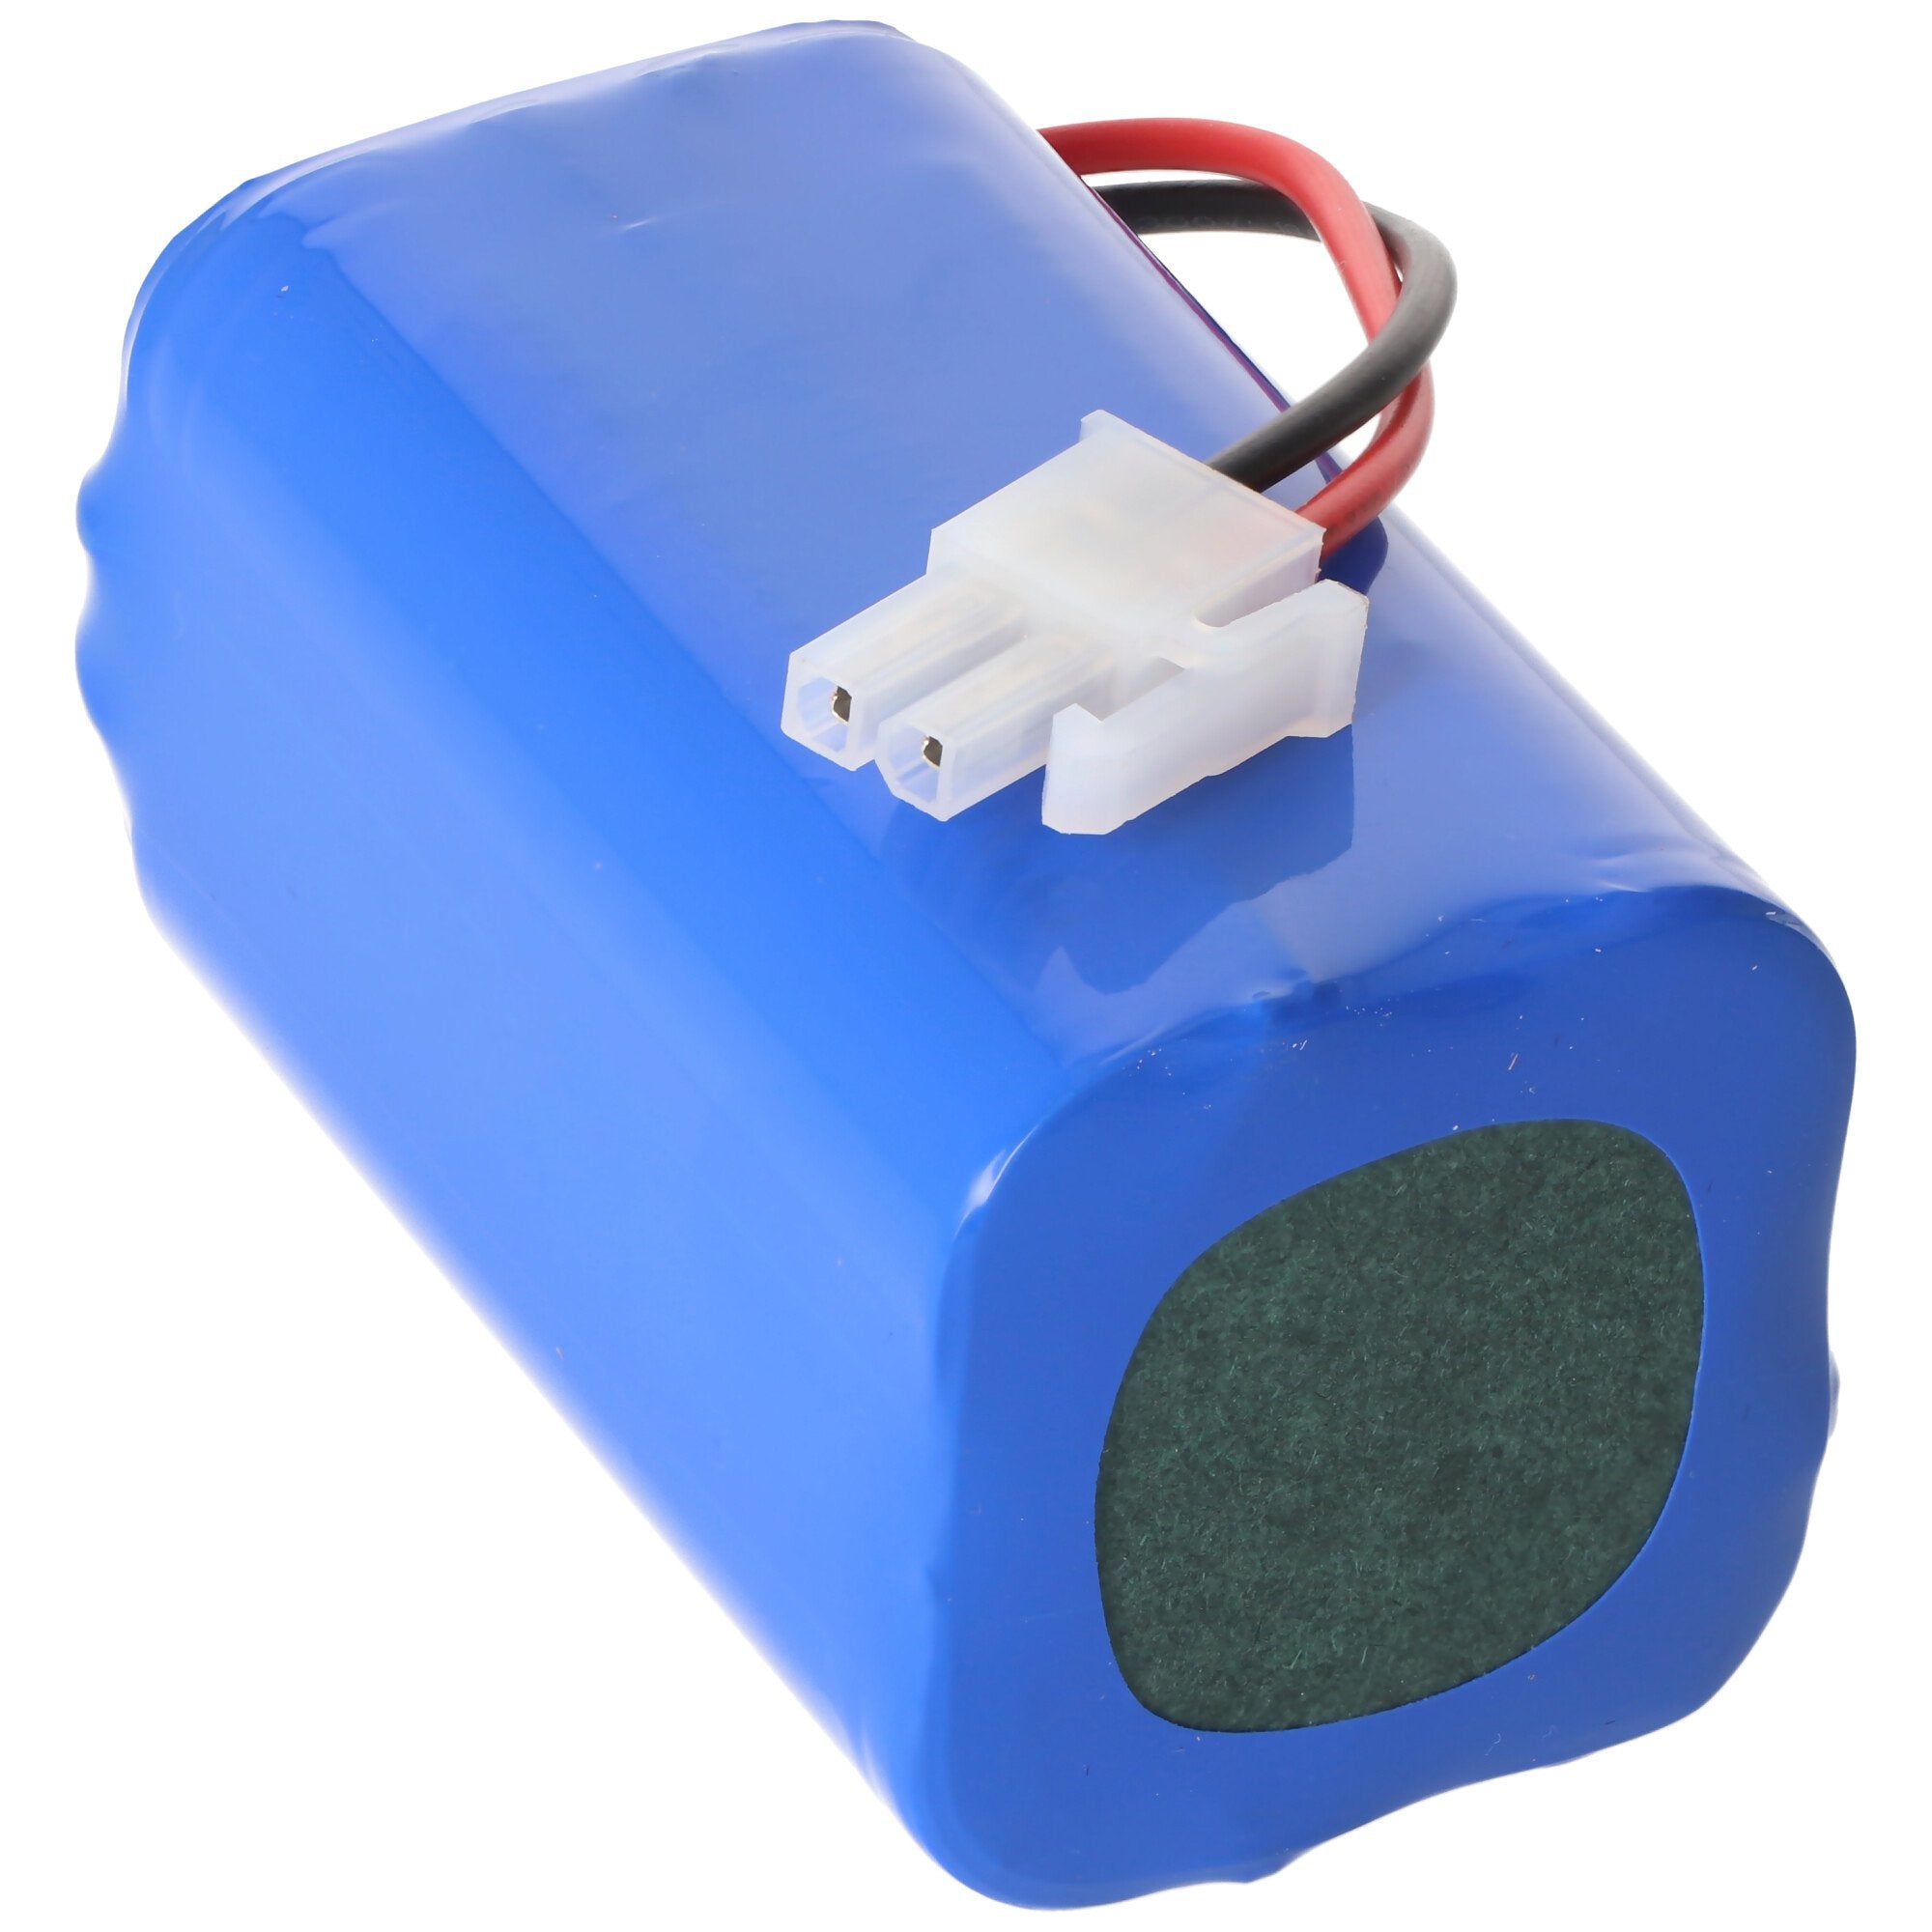 Battery only suitable for the Silvercrest battery SSRA1, 305857 14.8 Volt 2600mAh 38.5Wh